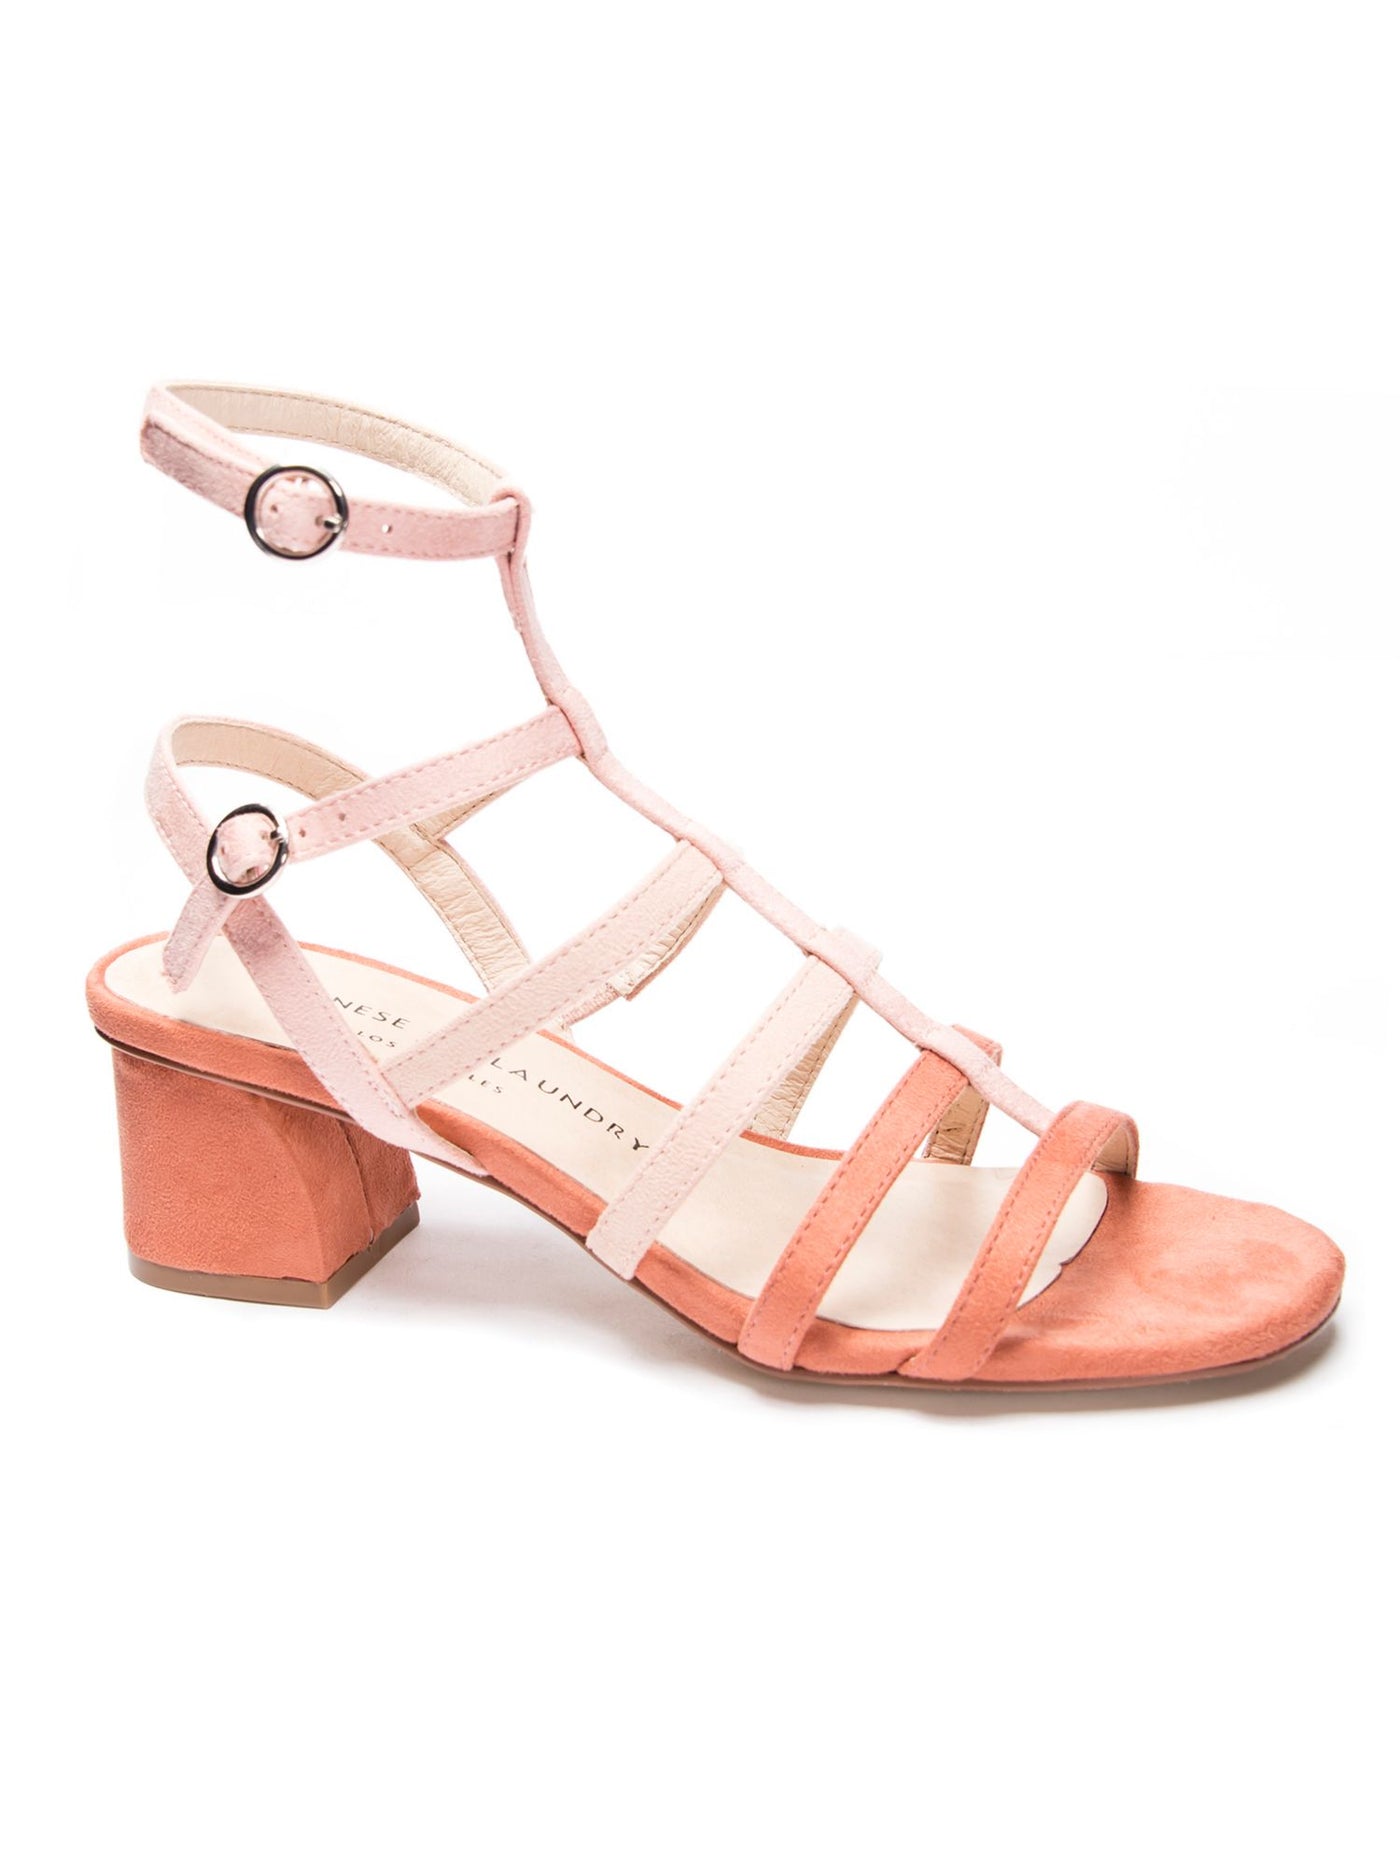 CHINESE LAUNDRY Womens Coral Strappy Padded Monroe Round Toe Block Heel Buckle Dress Sandals Shoes 7.5 M